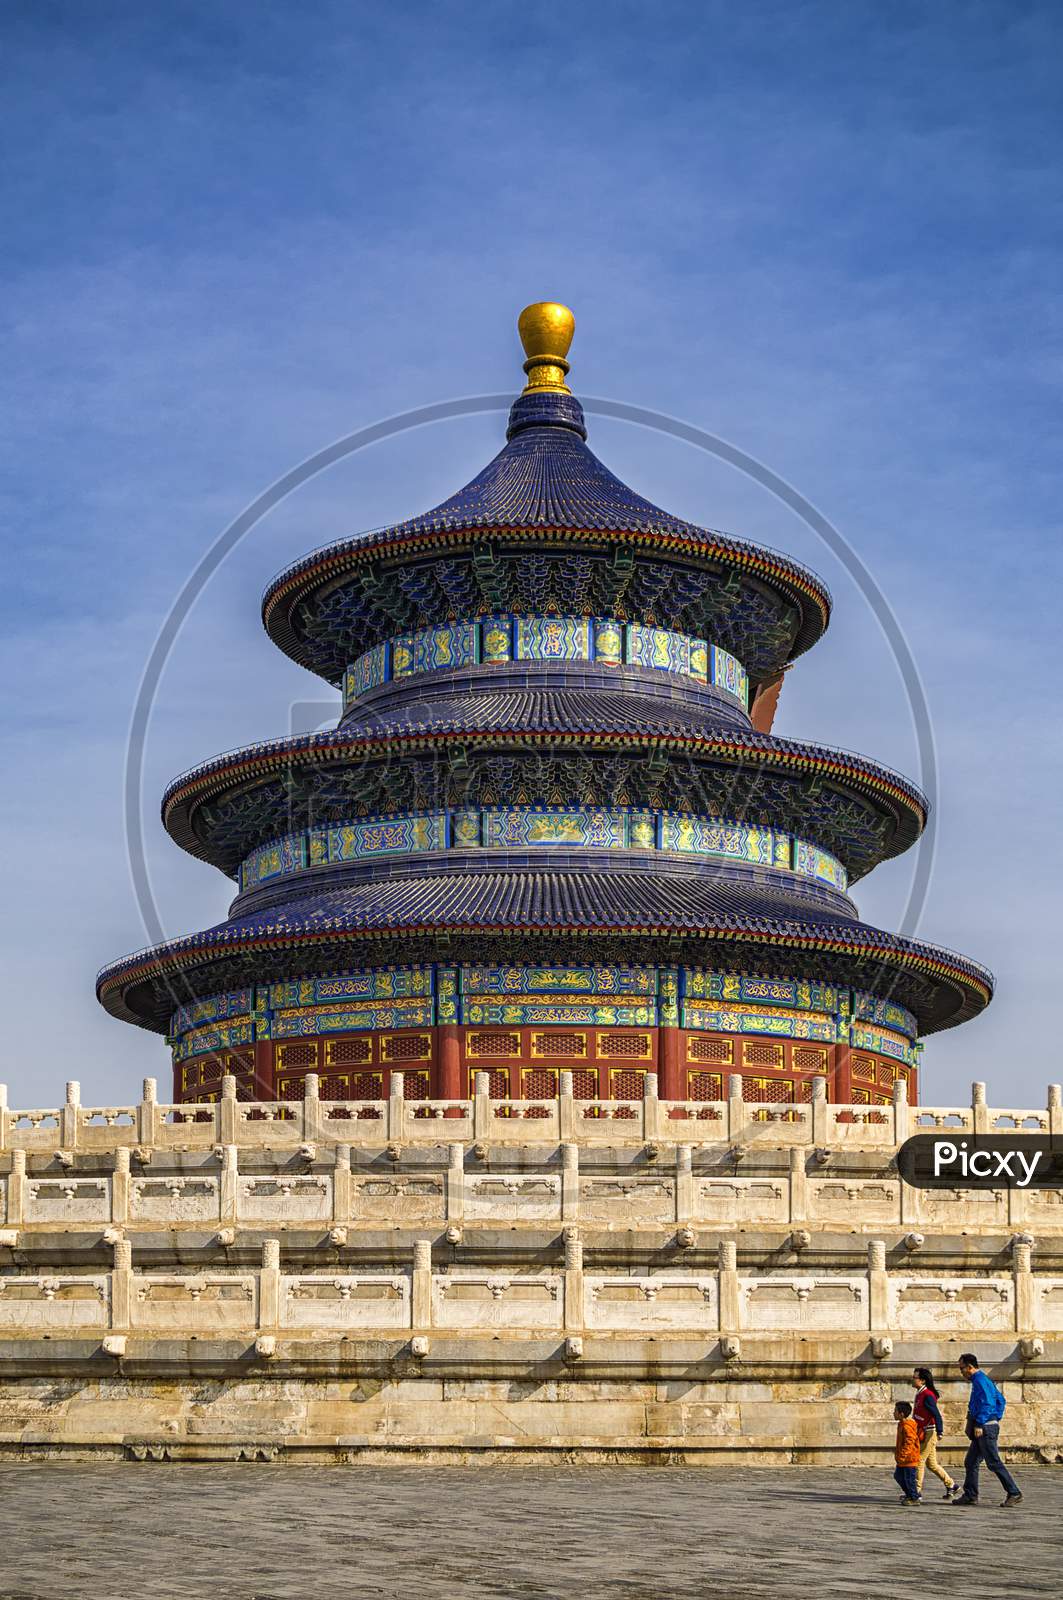 Hall Of Prayer For Good Harvests In The Temple Of Heaven In Beijing, China